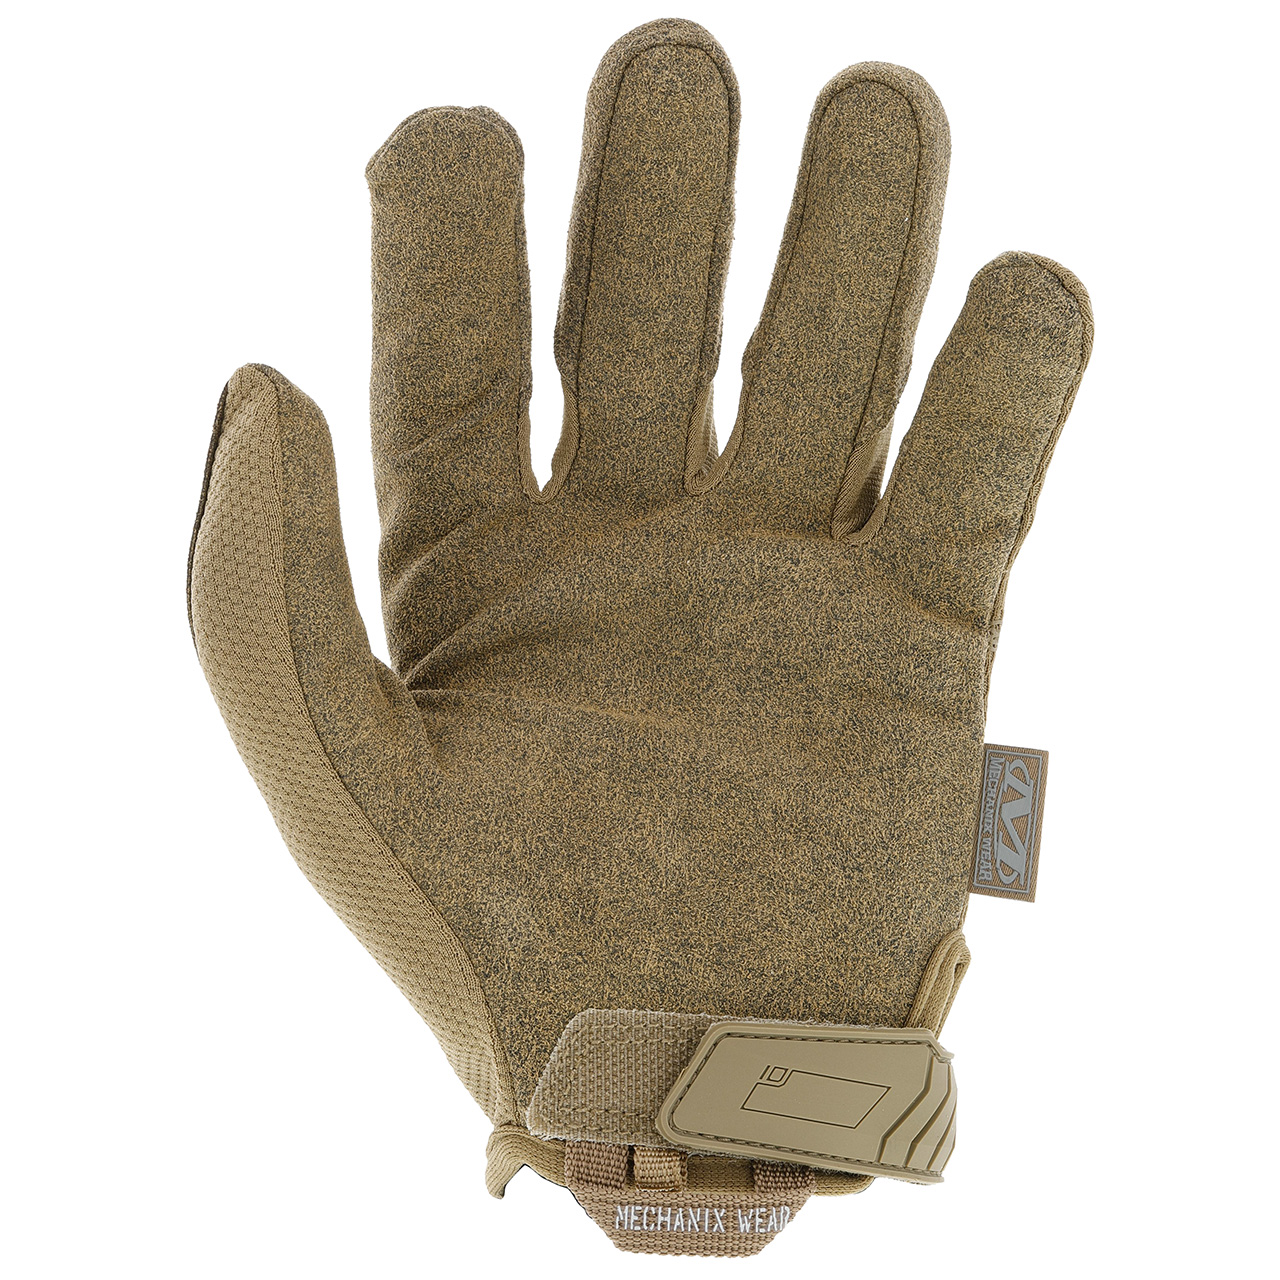 https://cdn11.bigcommerce.com/s-4s9liwcv/images/stencil/original/products/117862/484205/MG-72-mechanix-wear-the-original-coyote-tactical-gloves-pic3__64469.1612331555.jpg?c=2&imbypass=on&imbypass=on